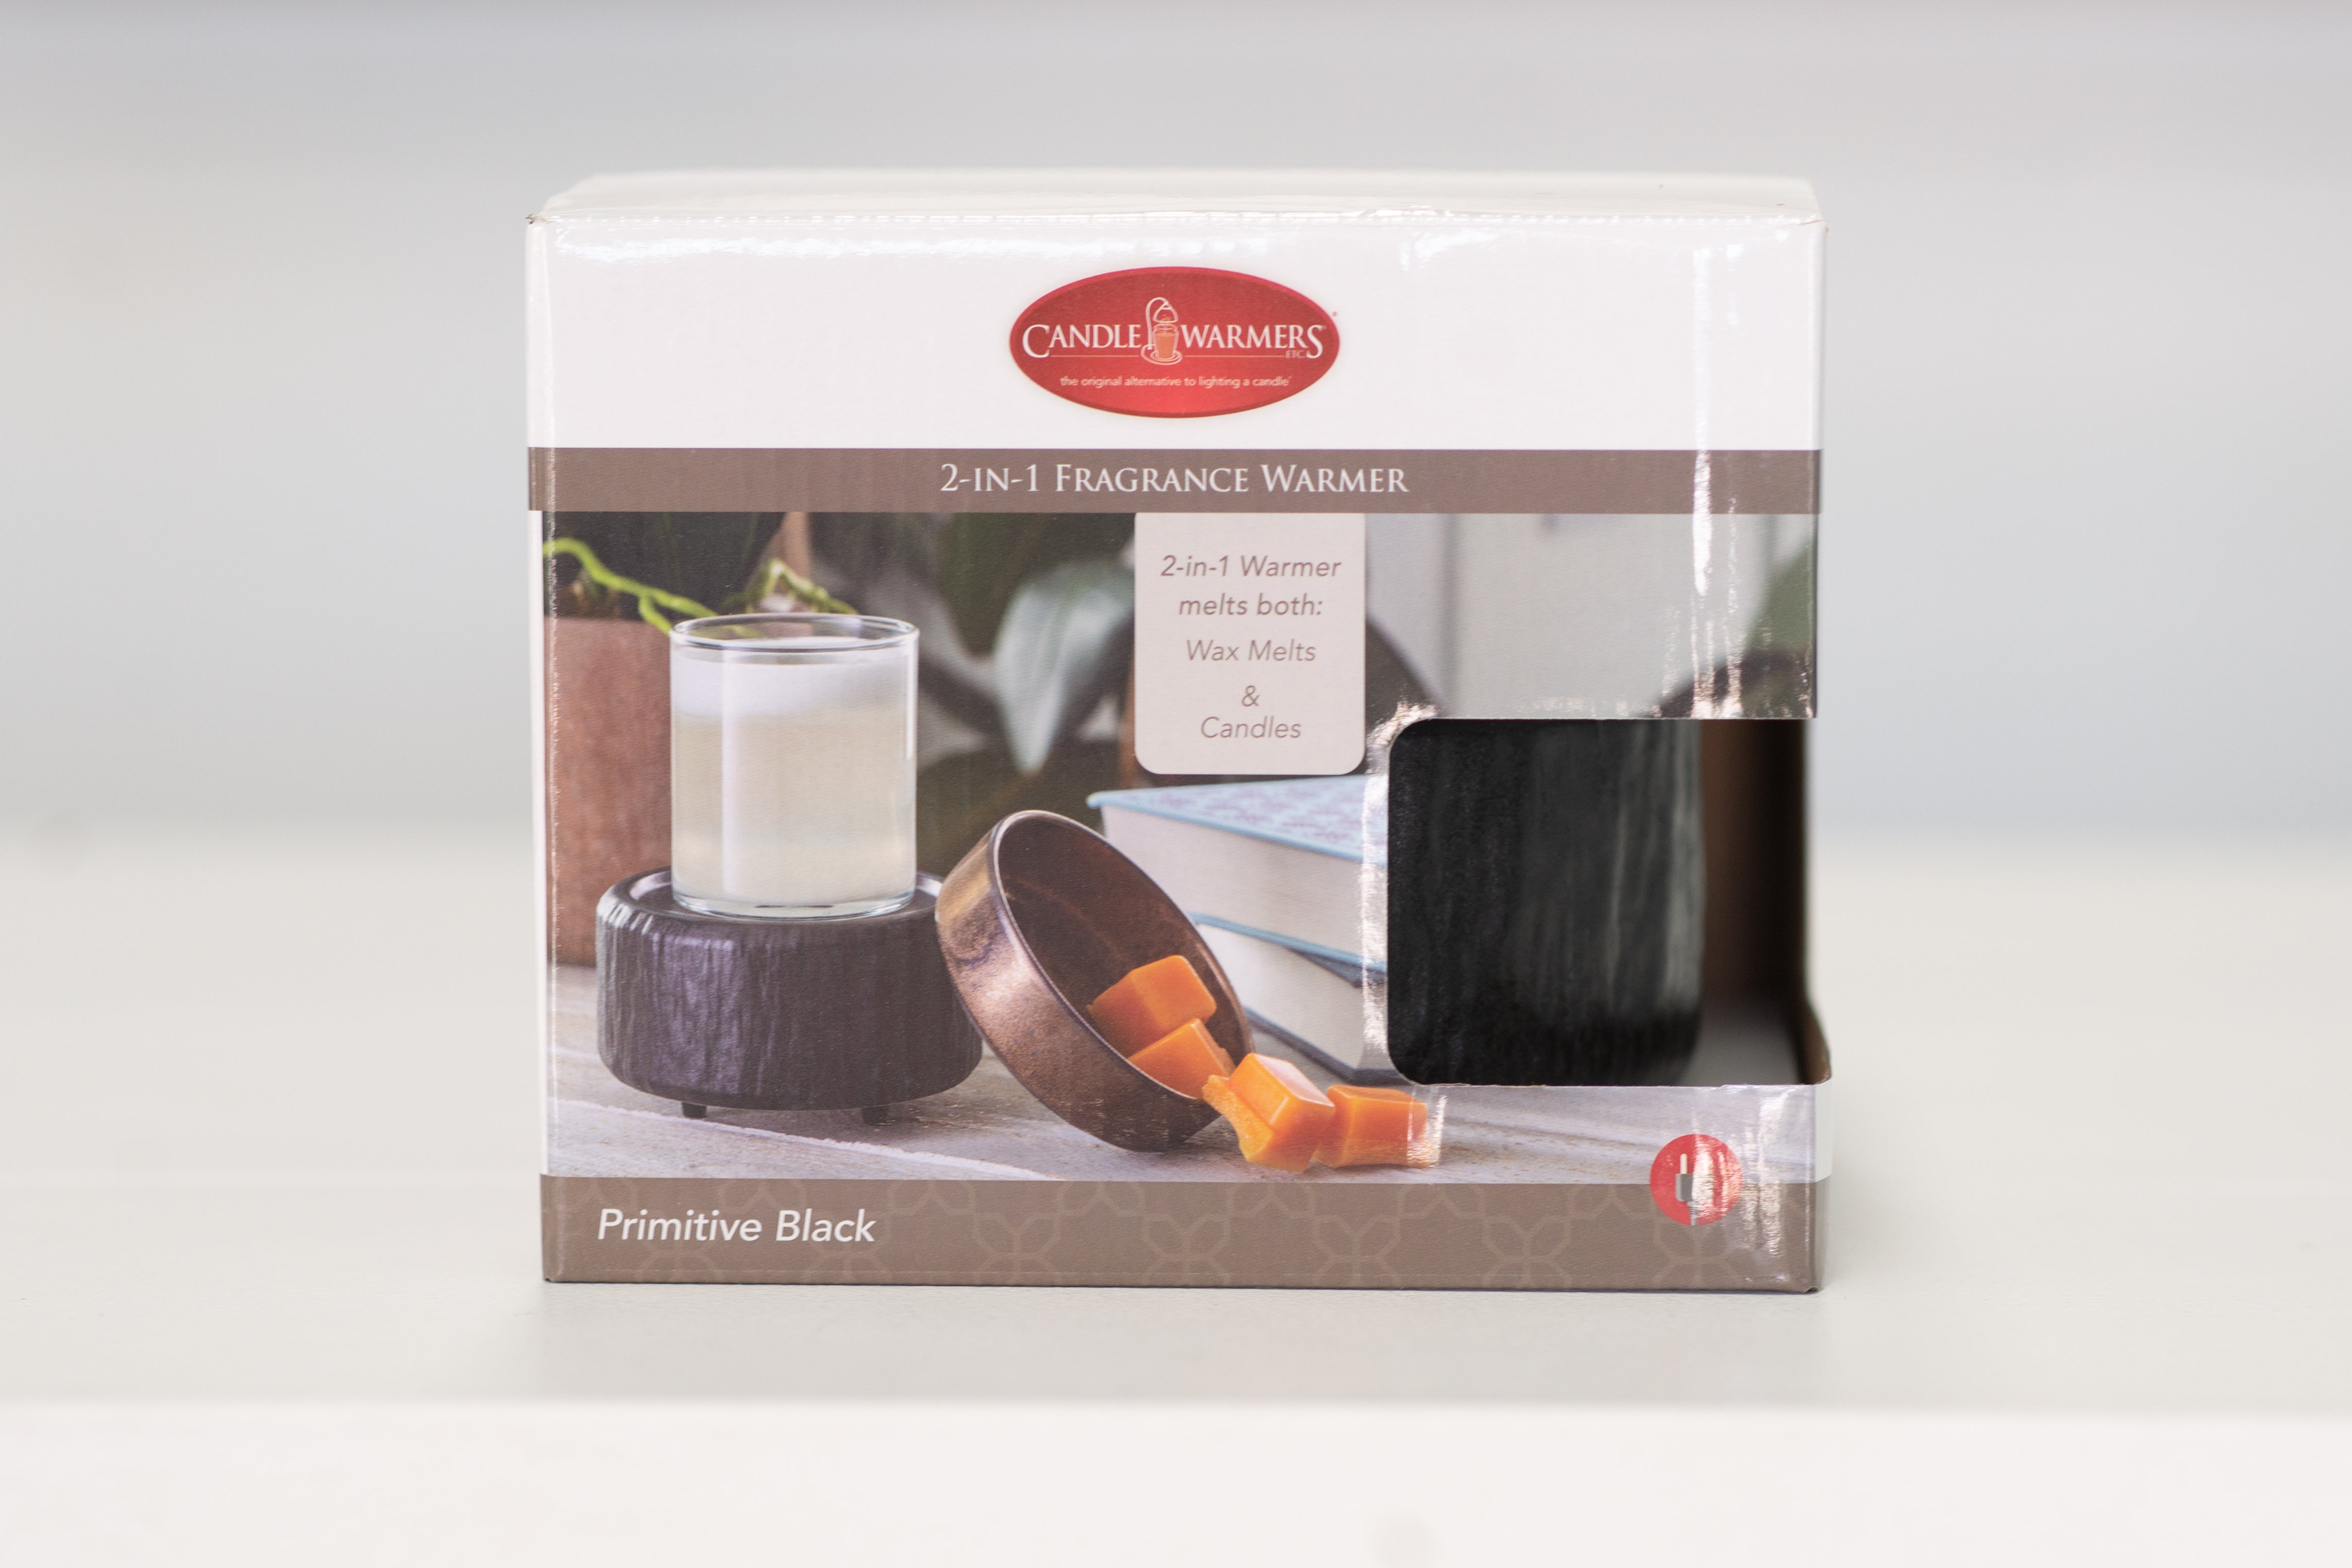 Candle Warmers - Primitive Black 2-in-1 Classic Fragrance Warmer